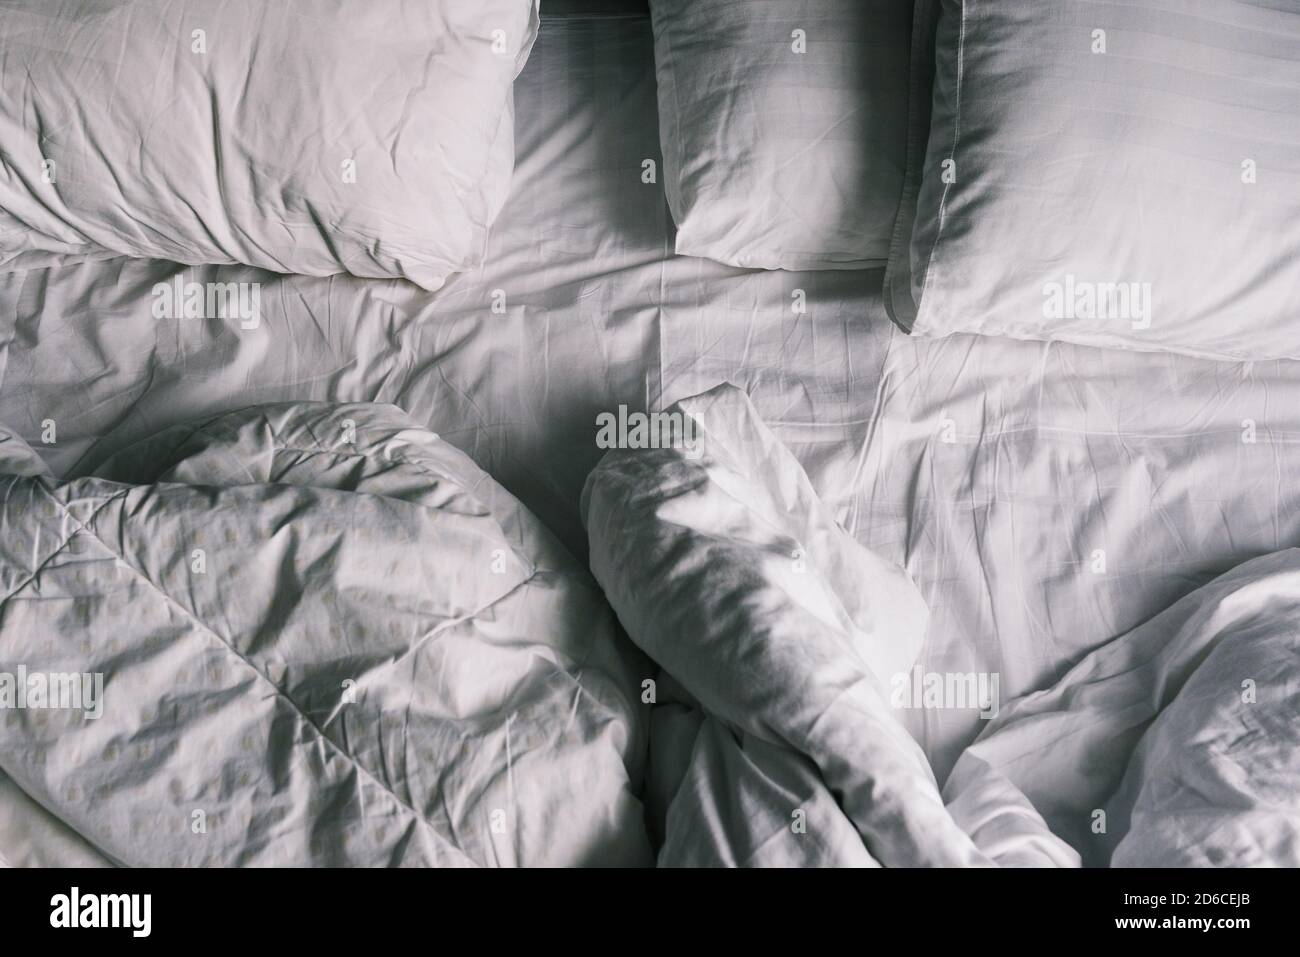 Unmade bed. Rumpled sheets and pillows after a night's sleep. The view from the top. Dirty white bed linen Stock Photo